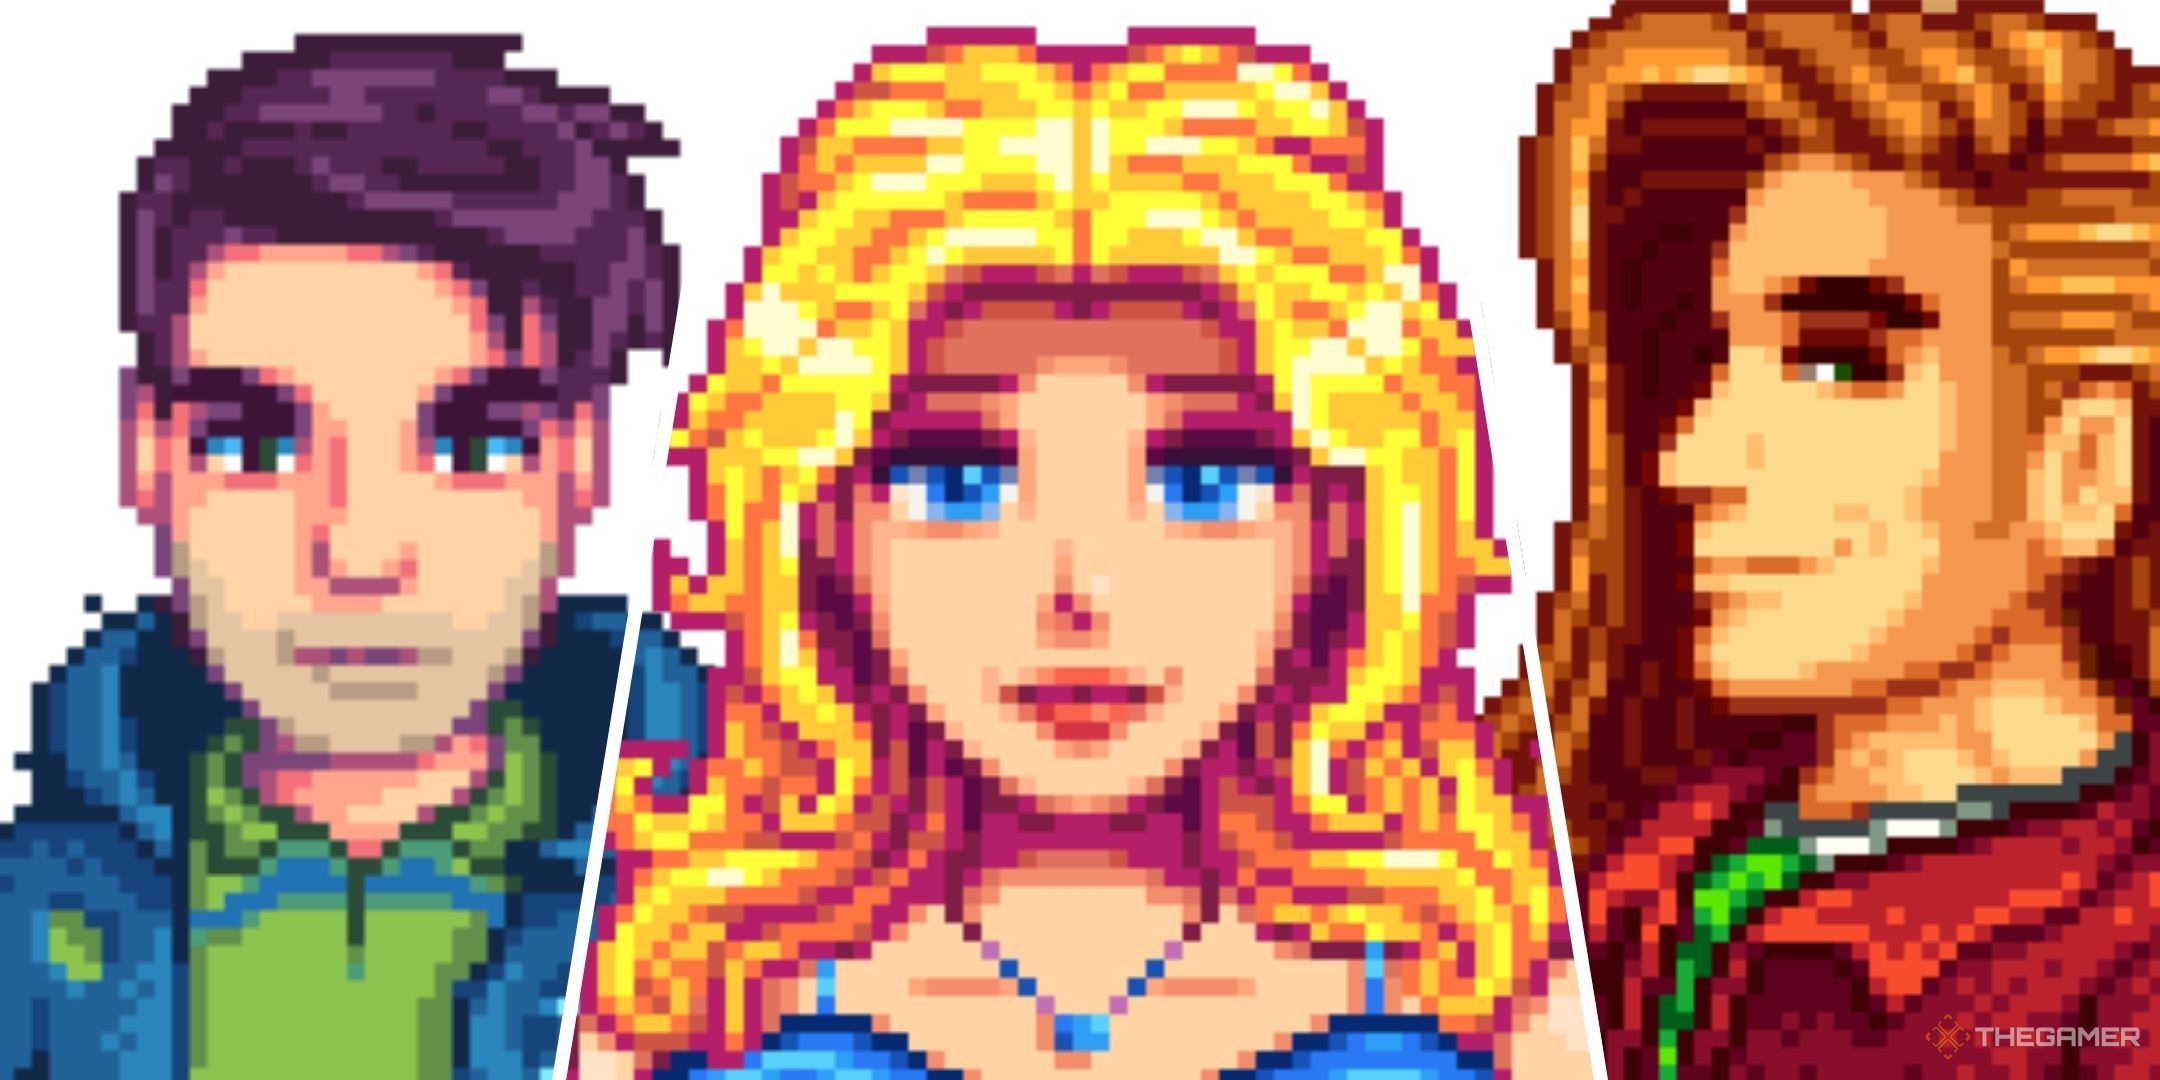 Split images of Shane, Haley, and Elliott from Stardew Valley